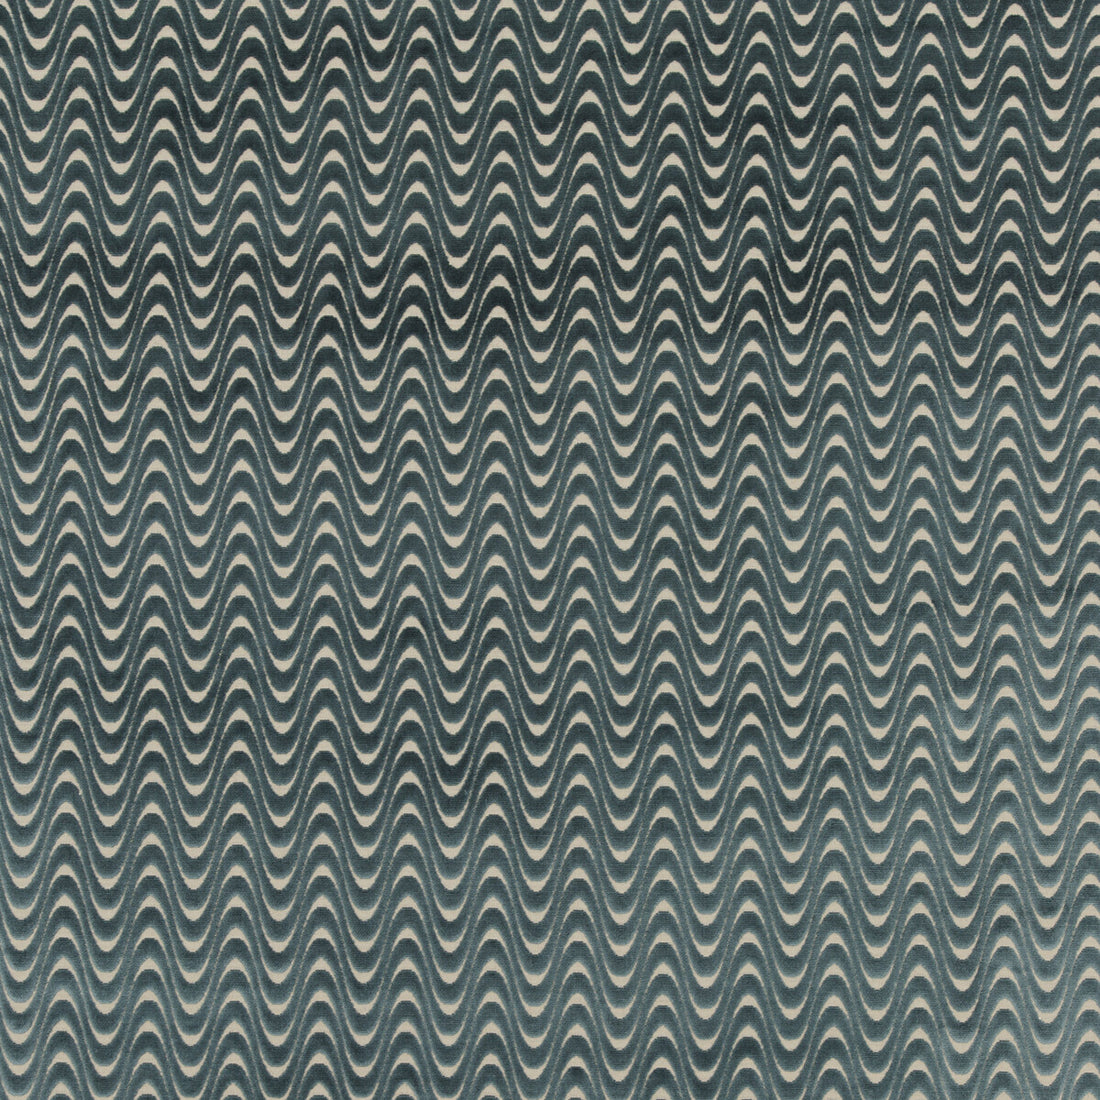 Jive fabric in teal color - pattern PF50421.615.0 - by Baker Lifestyle in the Carnival collection